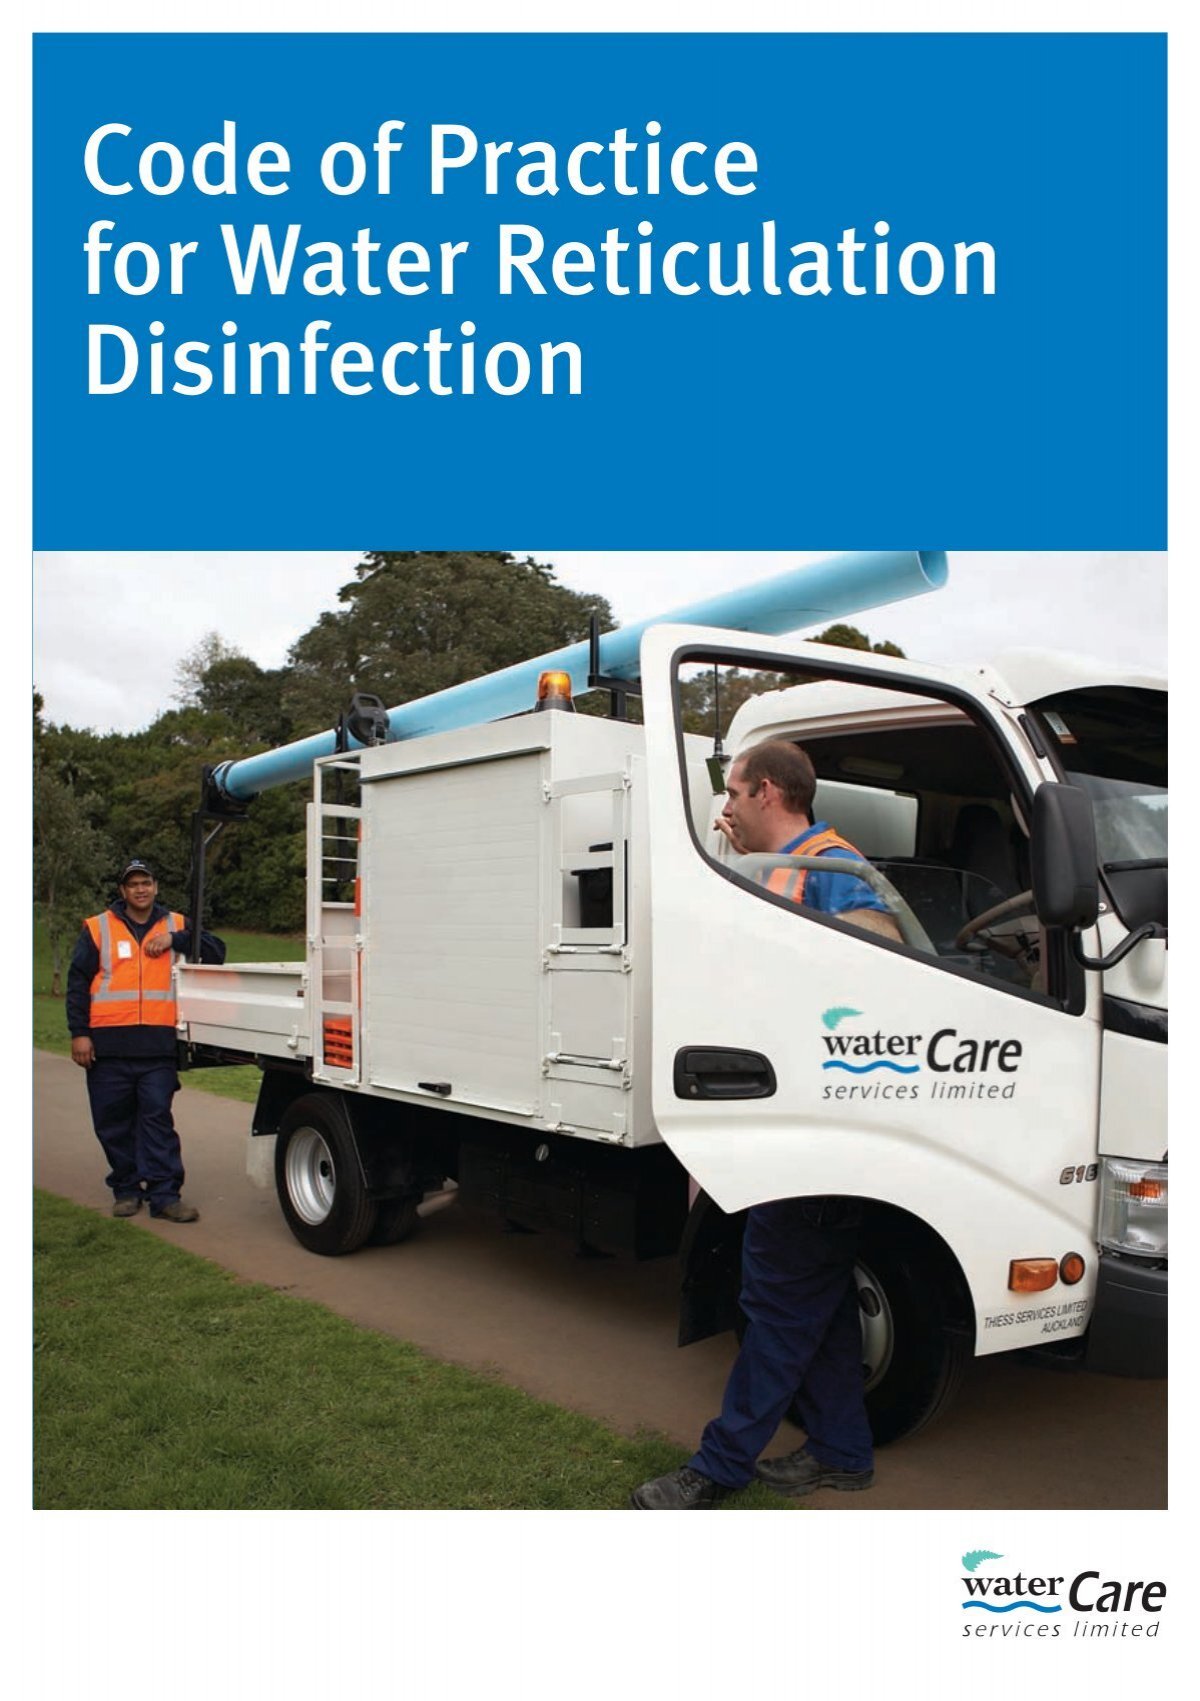 code-of-practice-for-water-reticulation-disinfection-watercare